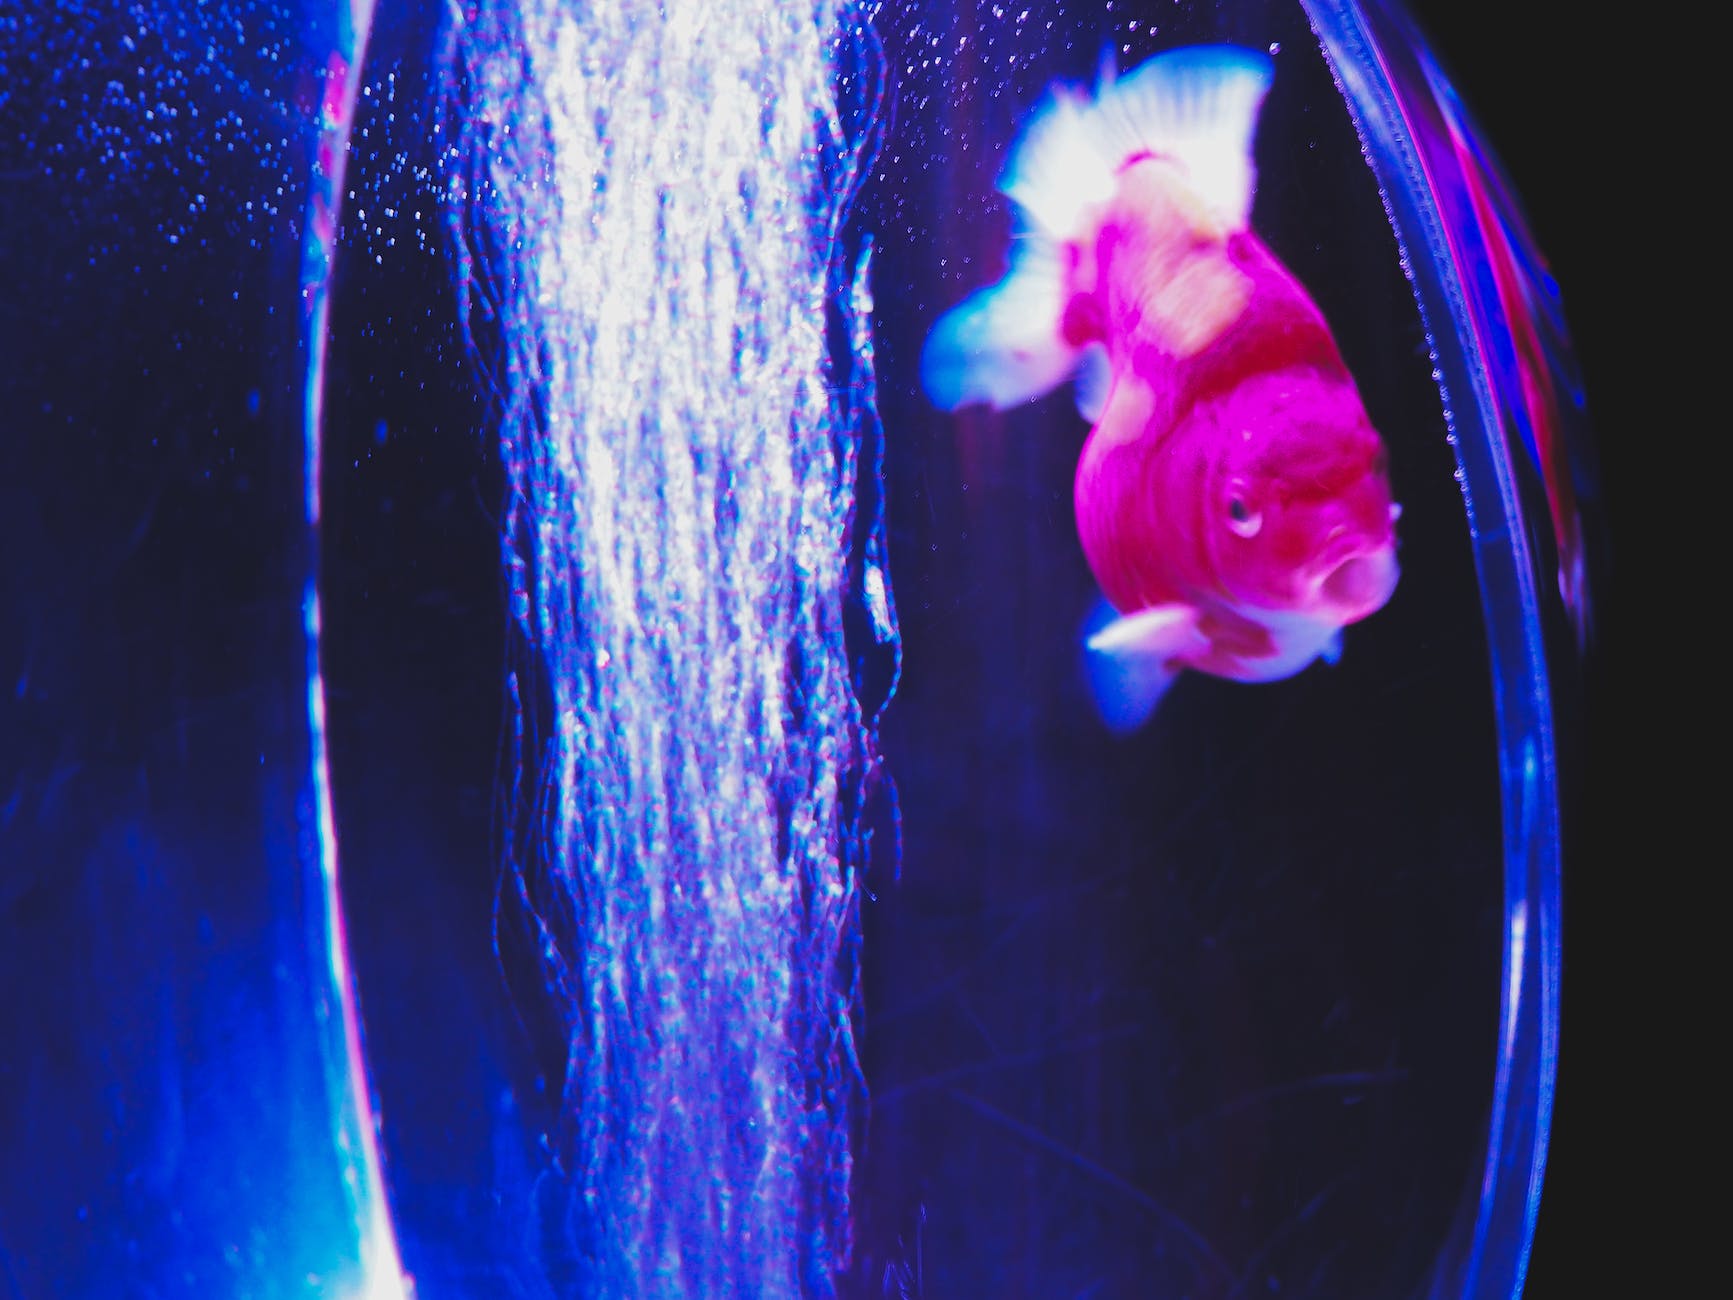 adorable goldfish swimming in aquarium water with glowing blue light